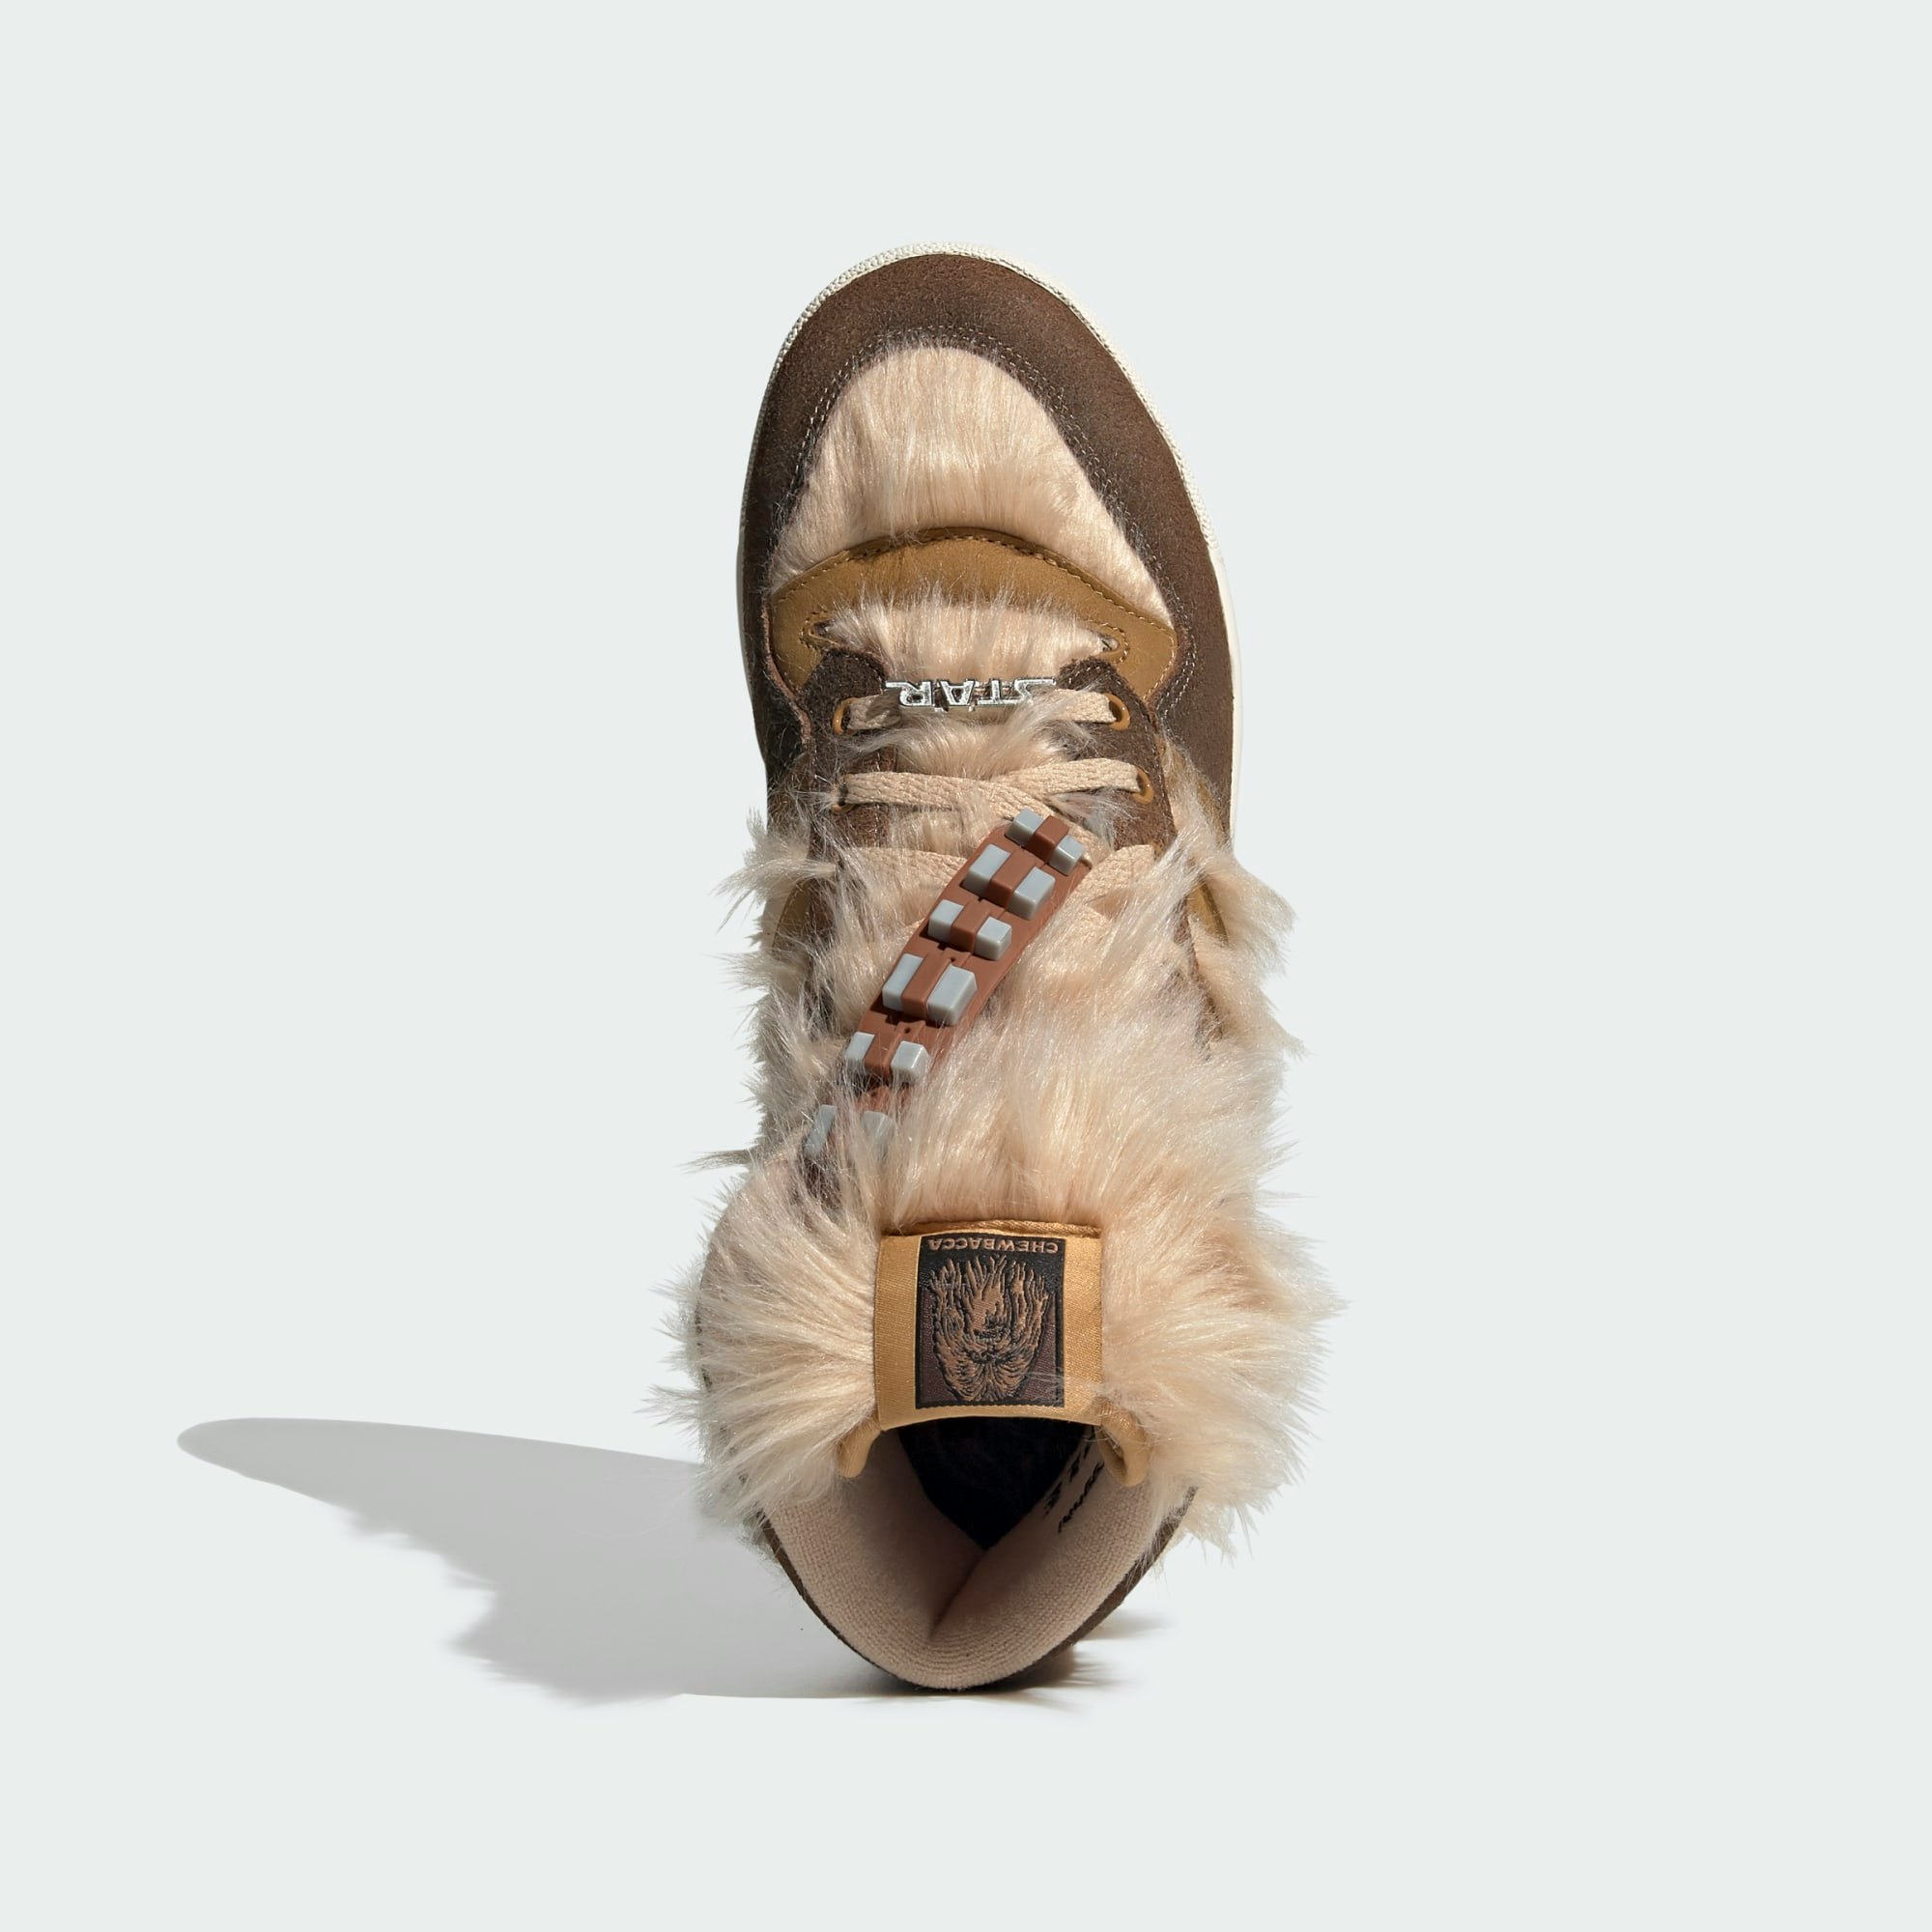 chewbacca shoes